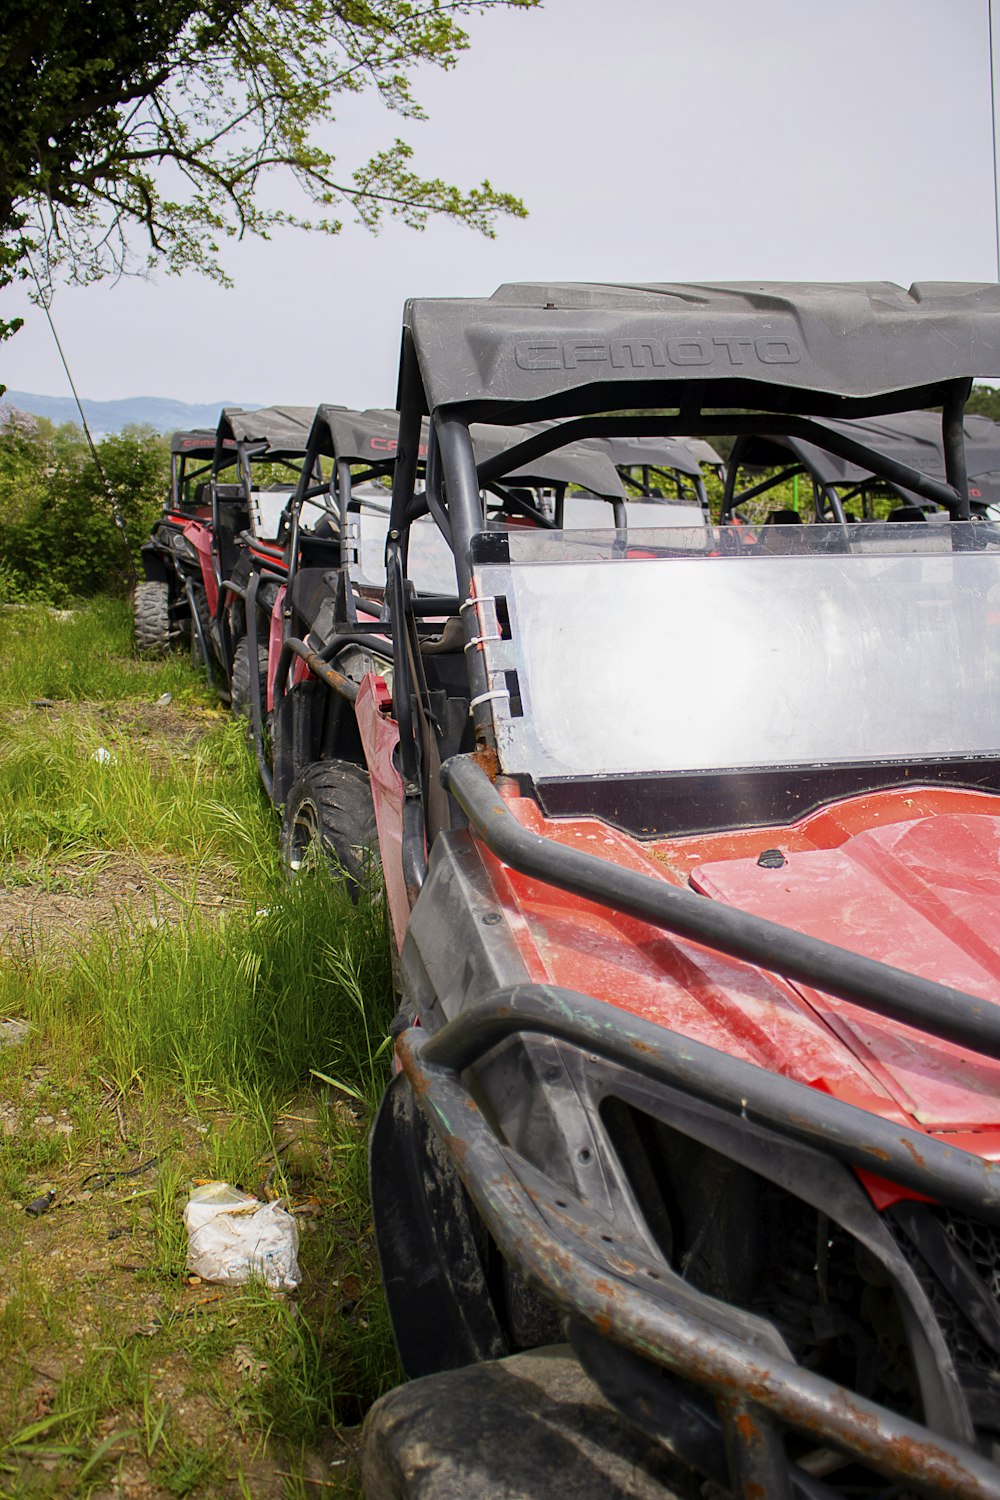 a line of off road vehicles parked in a field